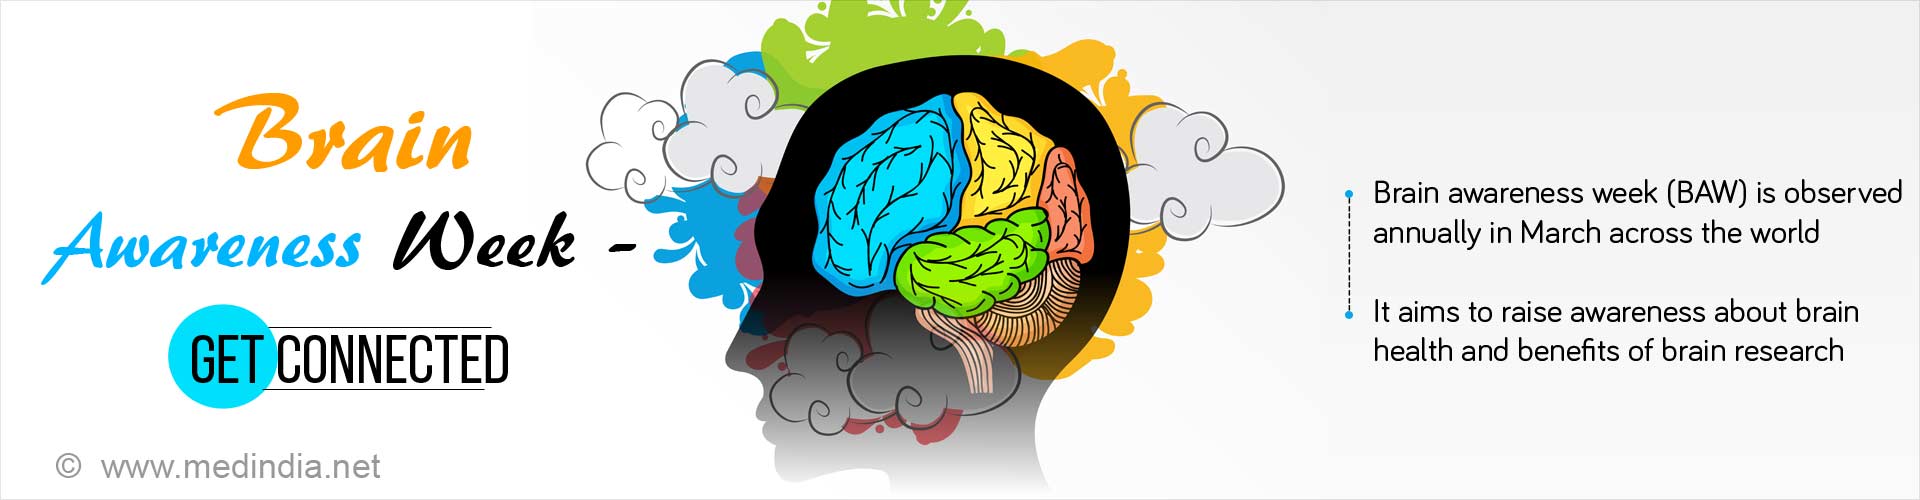 brain awareness week - get connected
- brain awareness week (BAW) is observed annually in March across the world
- it aims to raise awareness about brain health and benefits of brain research